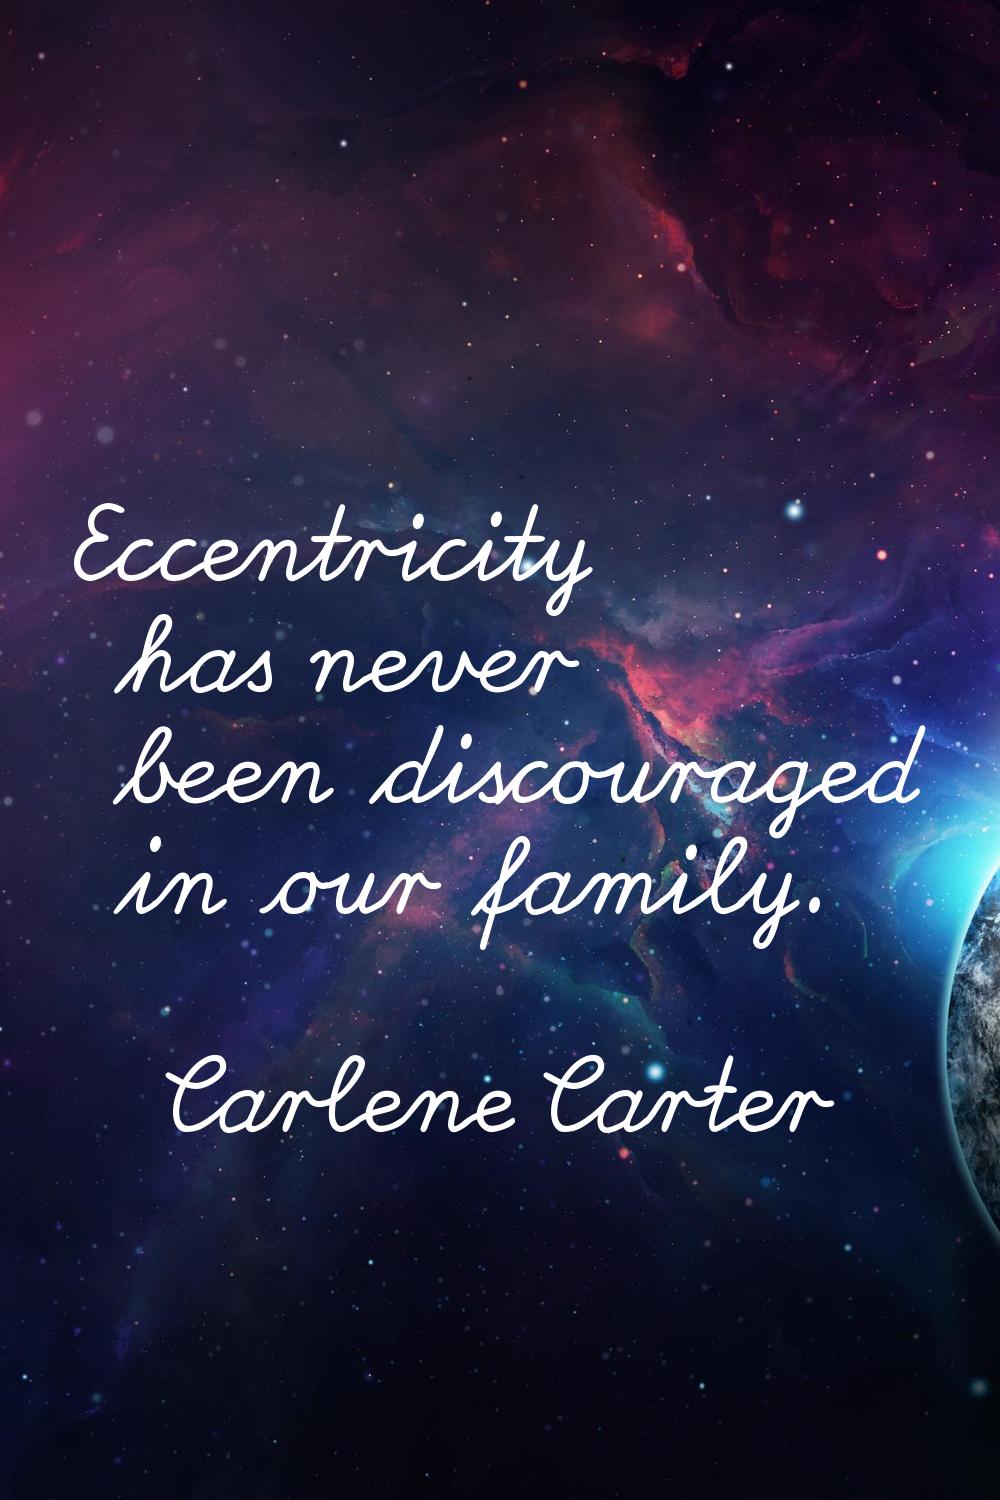 Eccentricity has never been discouraged in our family.